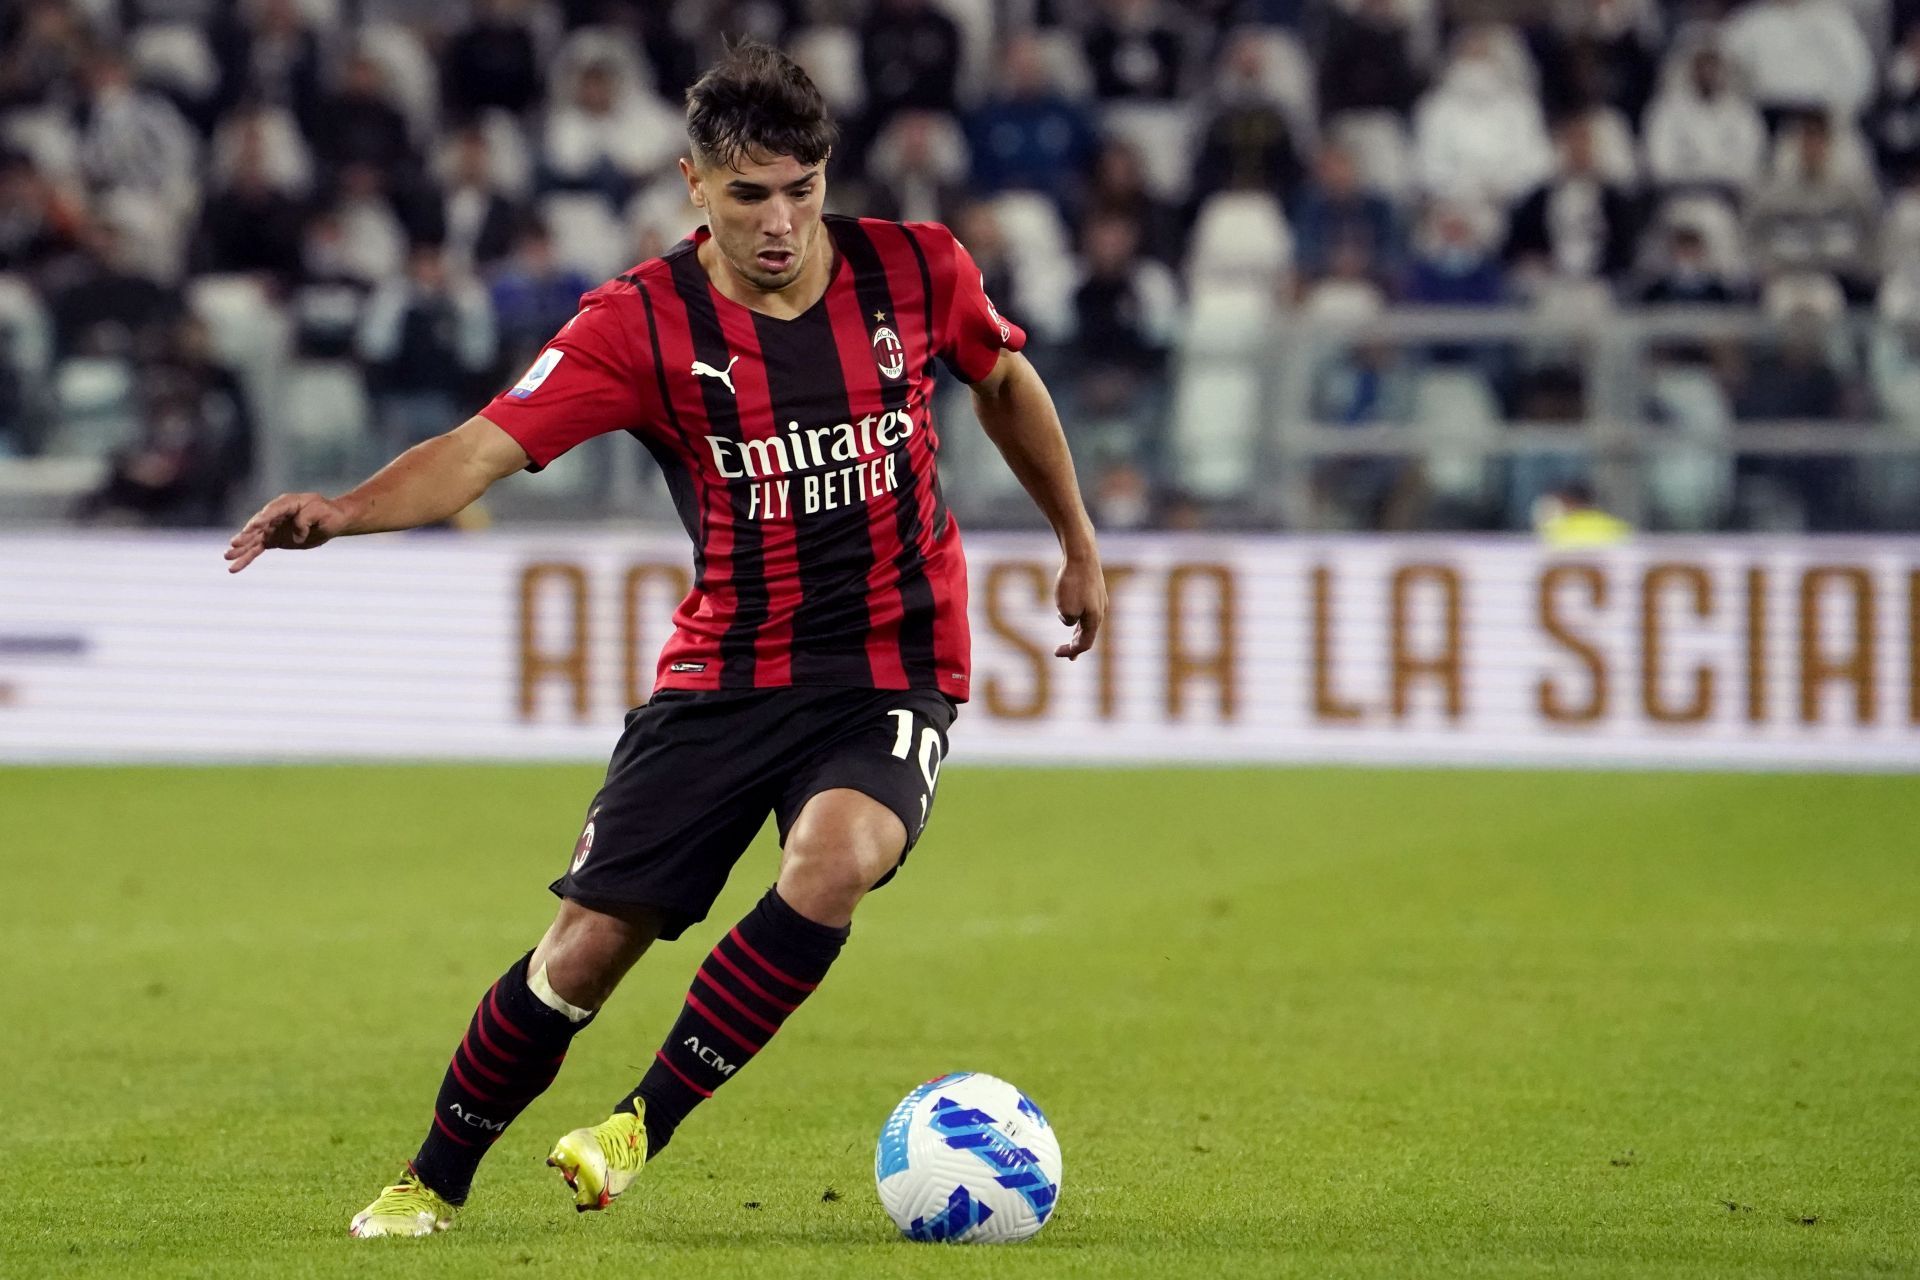 Diaz has proven himself as a match winner on multiple occasions for AC Milan